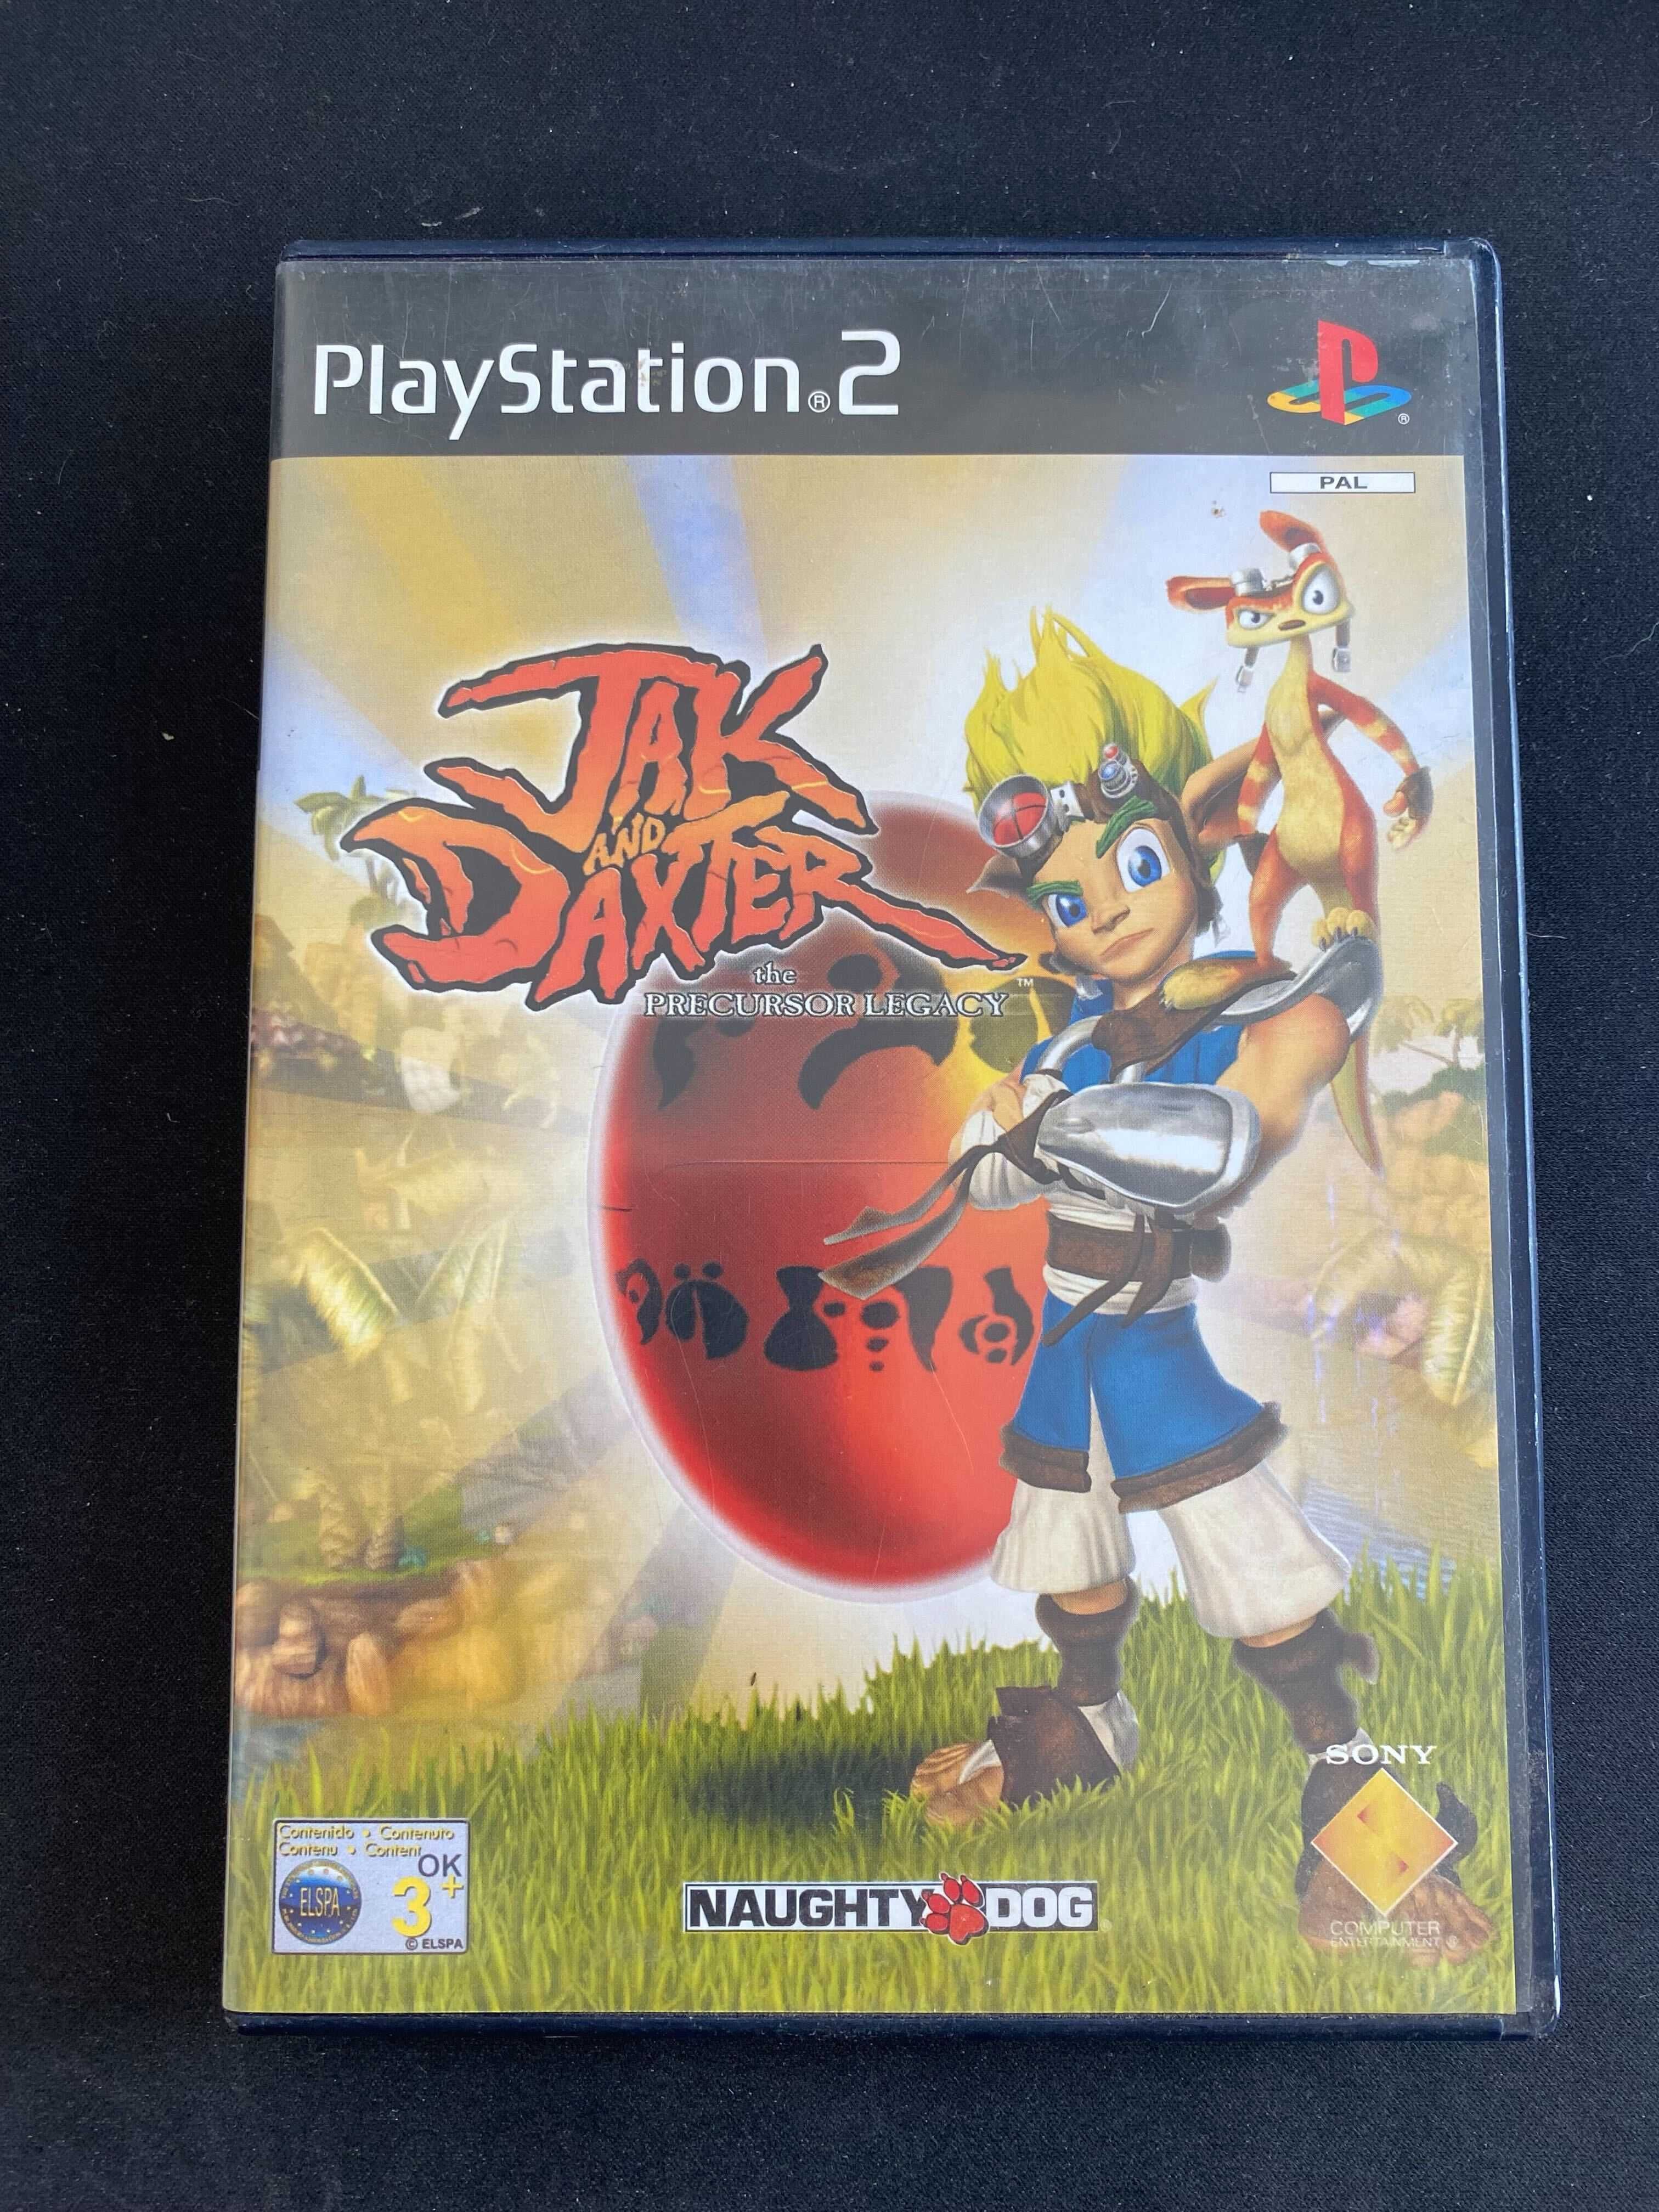 [PS2] Jak and Daxter - The Percursor Legacy